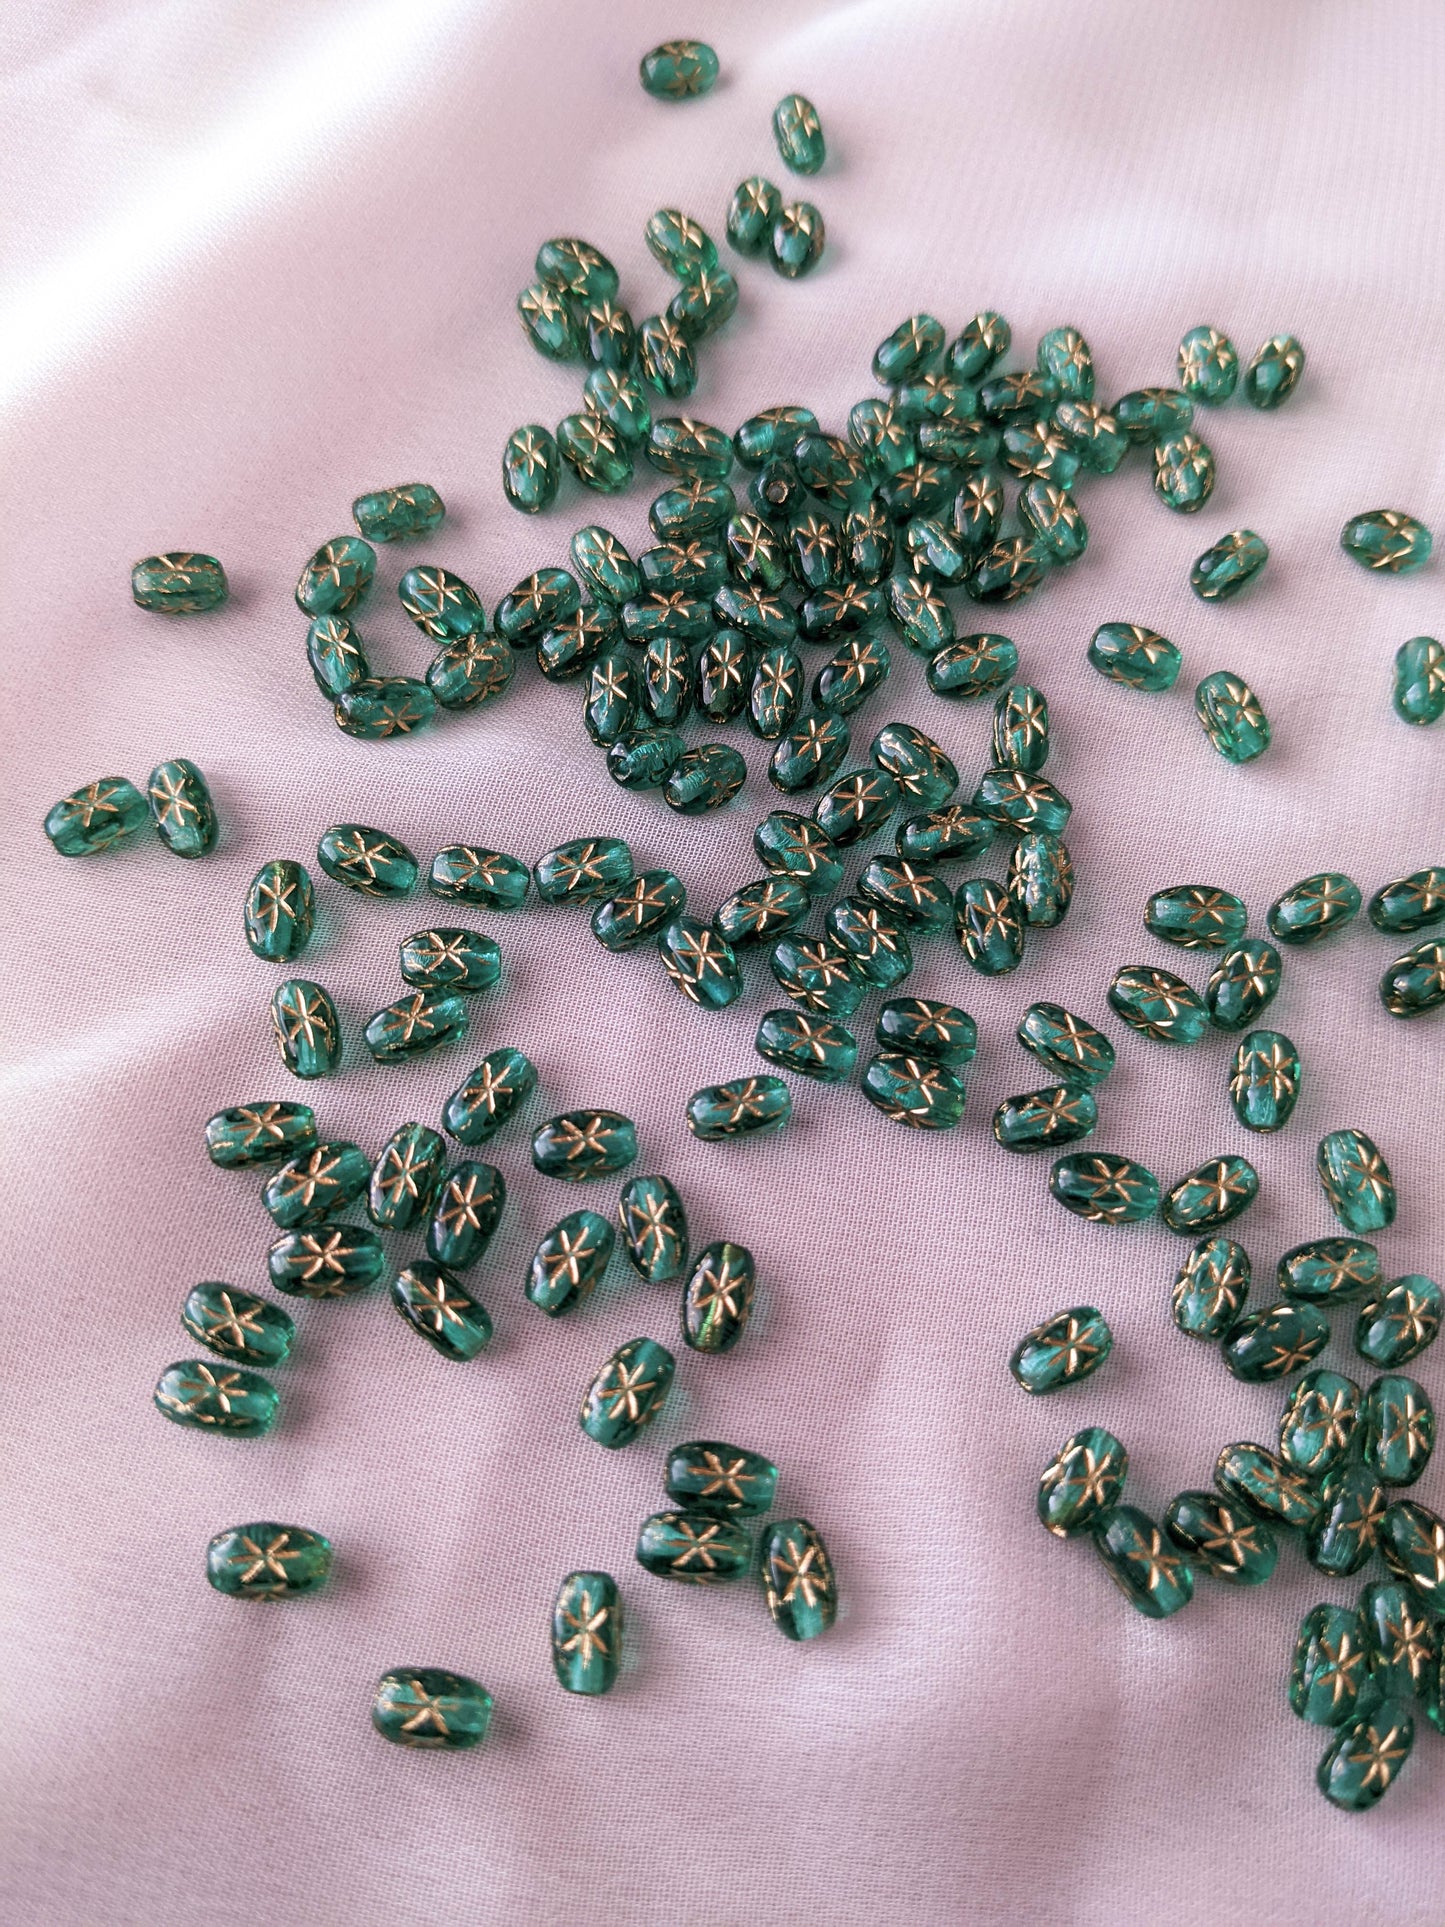 Twinkle Beads - Teal Green - Gold Ink - 6x4mm